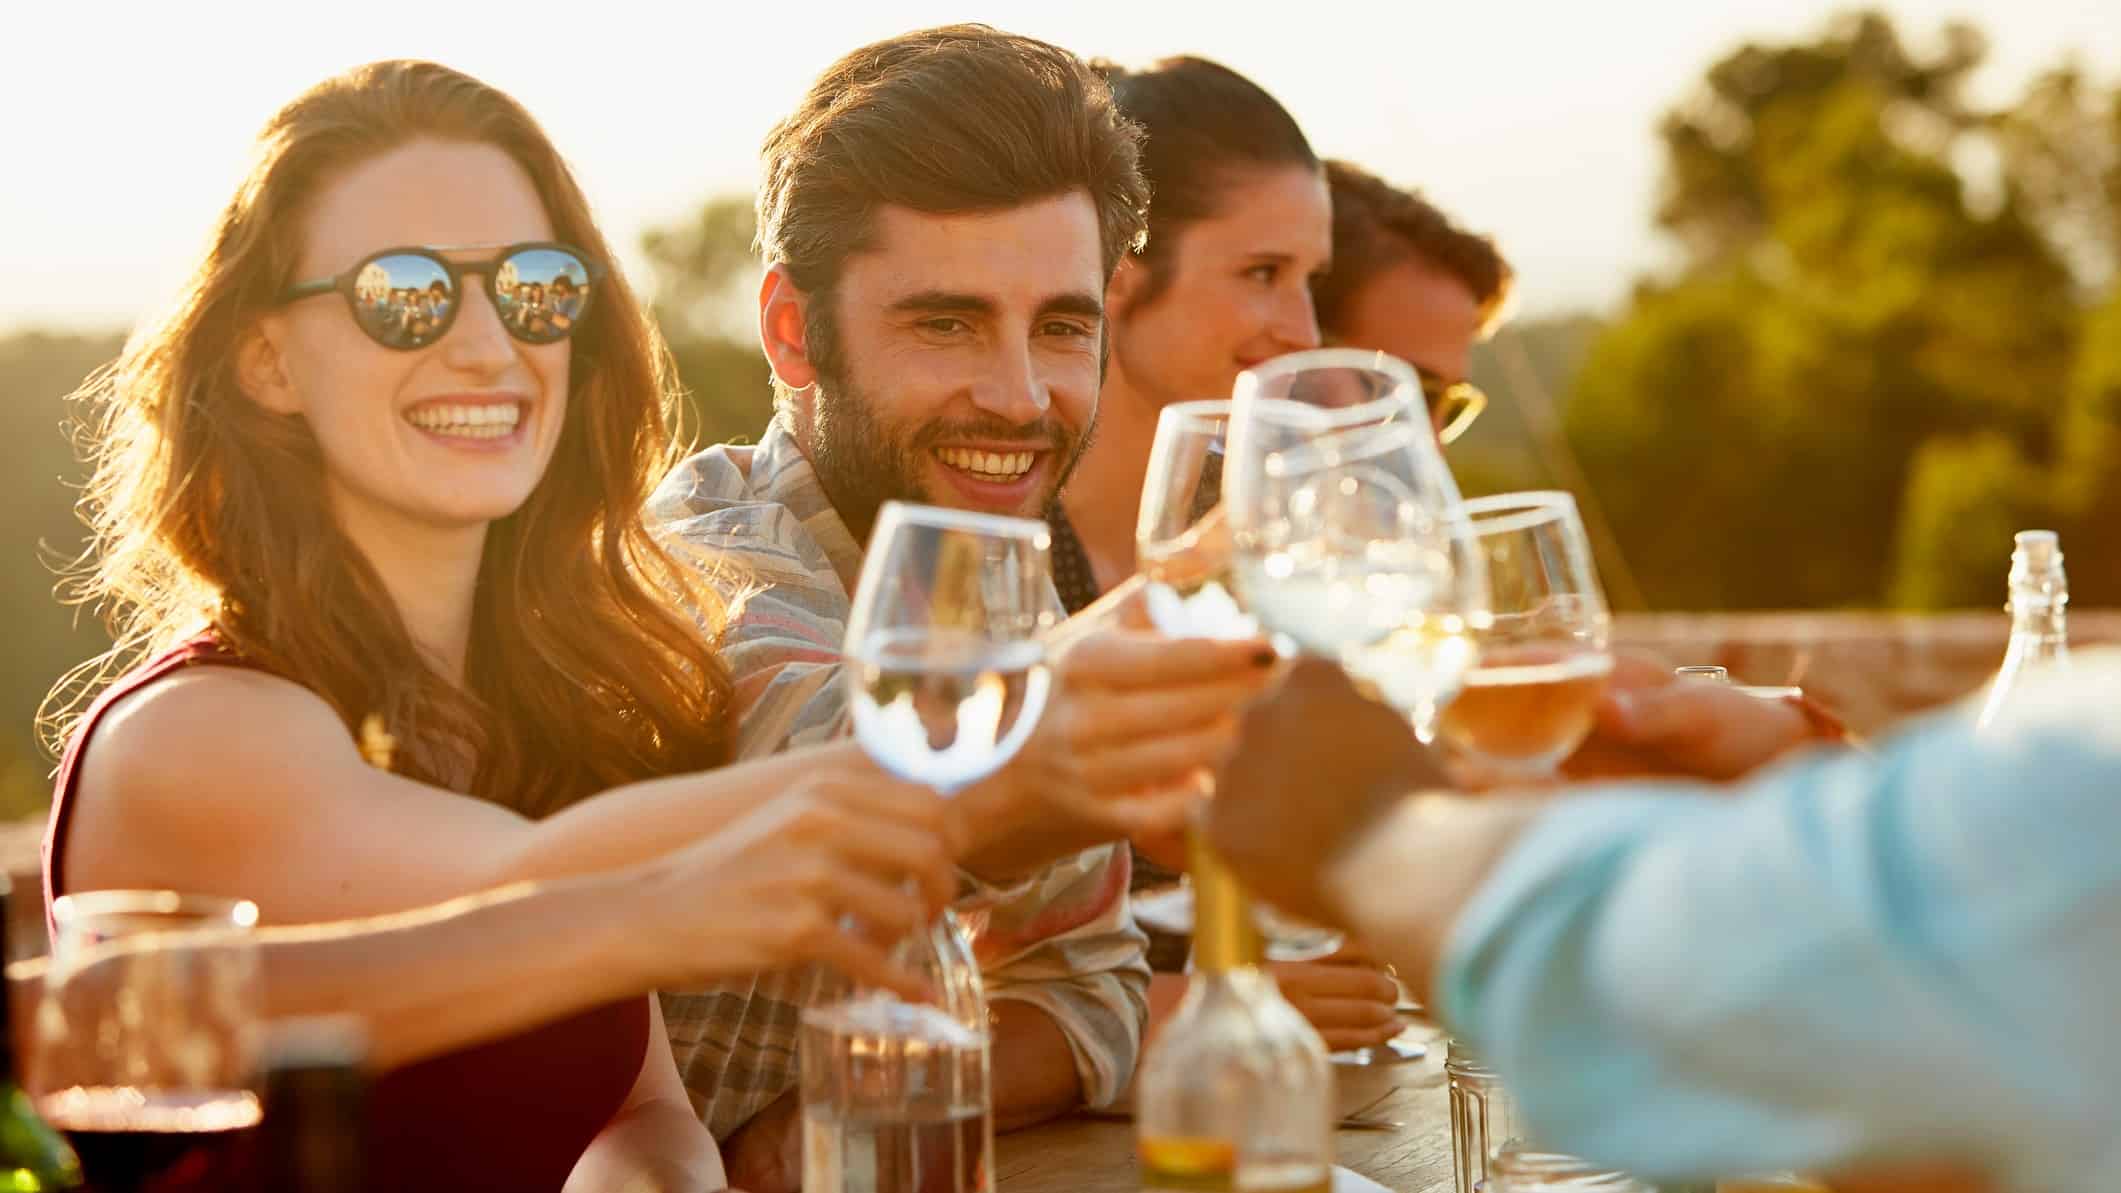 A group of people clink wine glasses in an outdoor, late afternoon setting to celebrate the latest dividend paid by Treasury shares